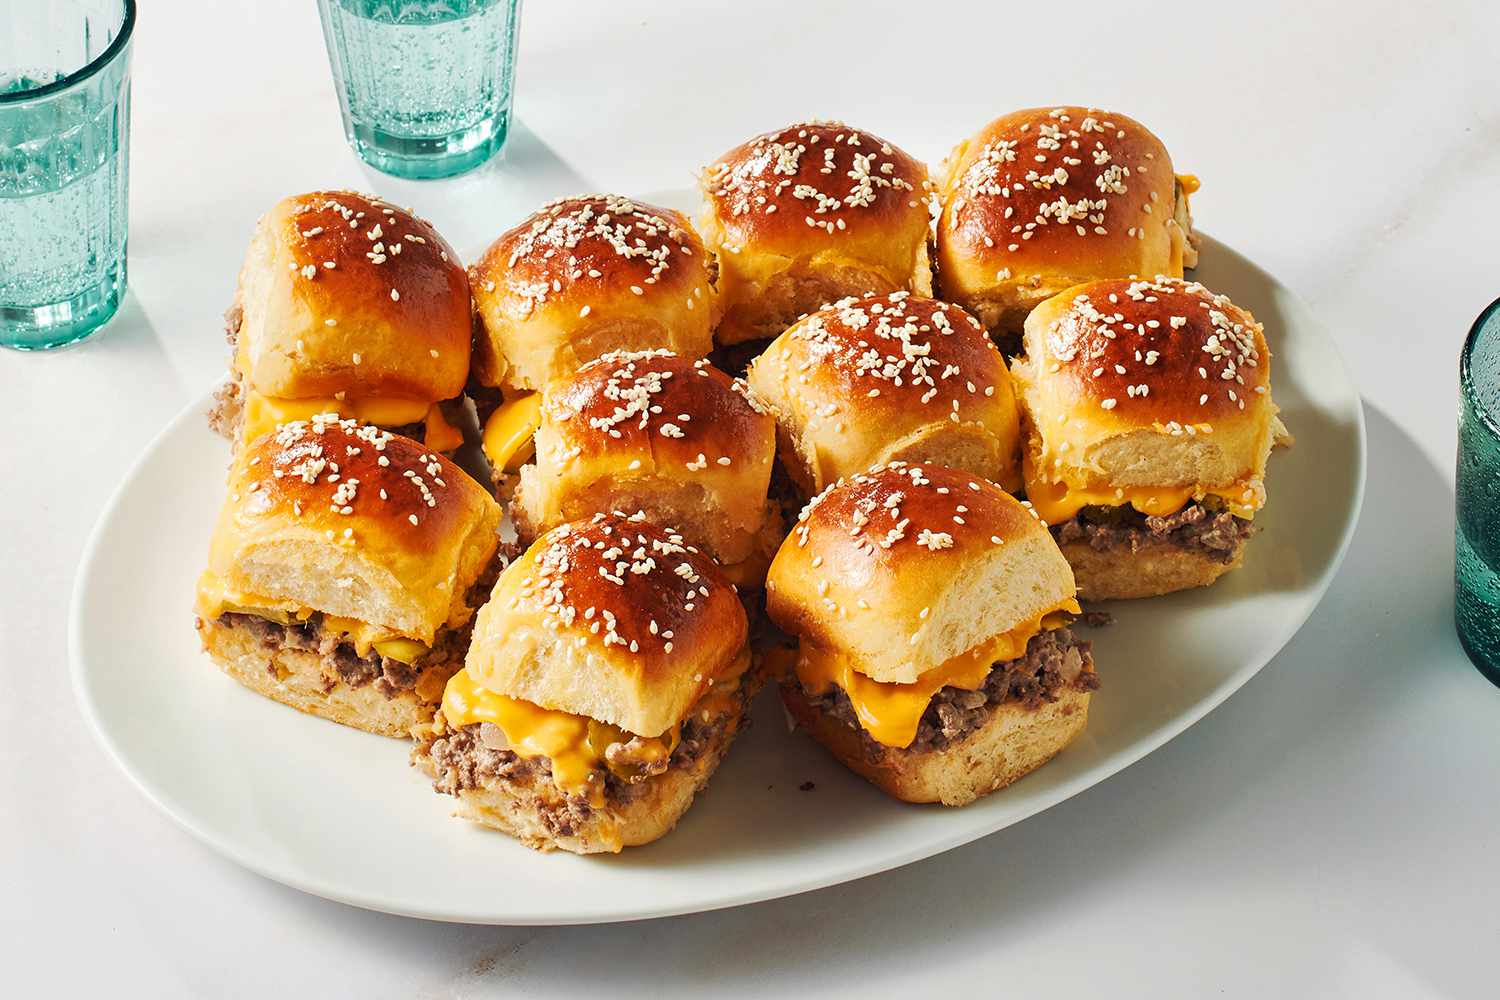 A serving plate of individual cheeseburger sliders